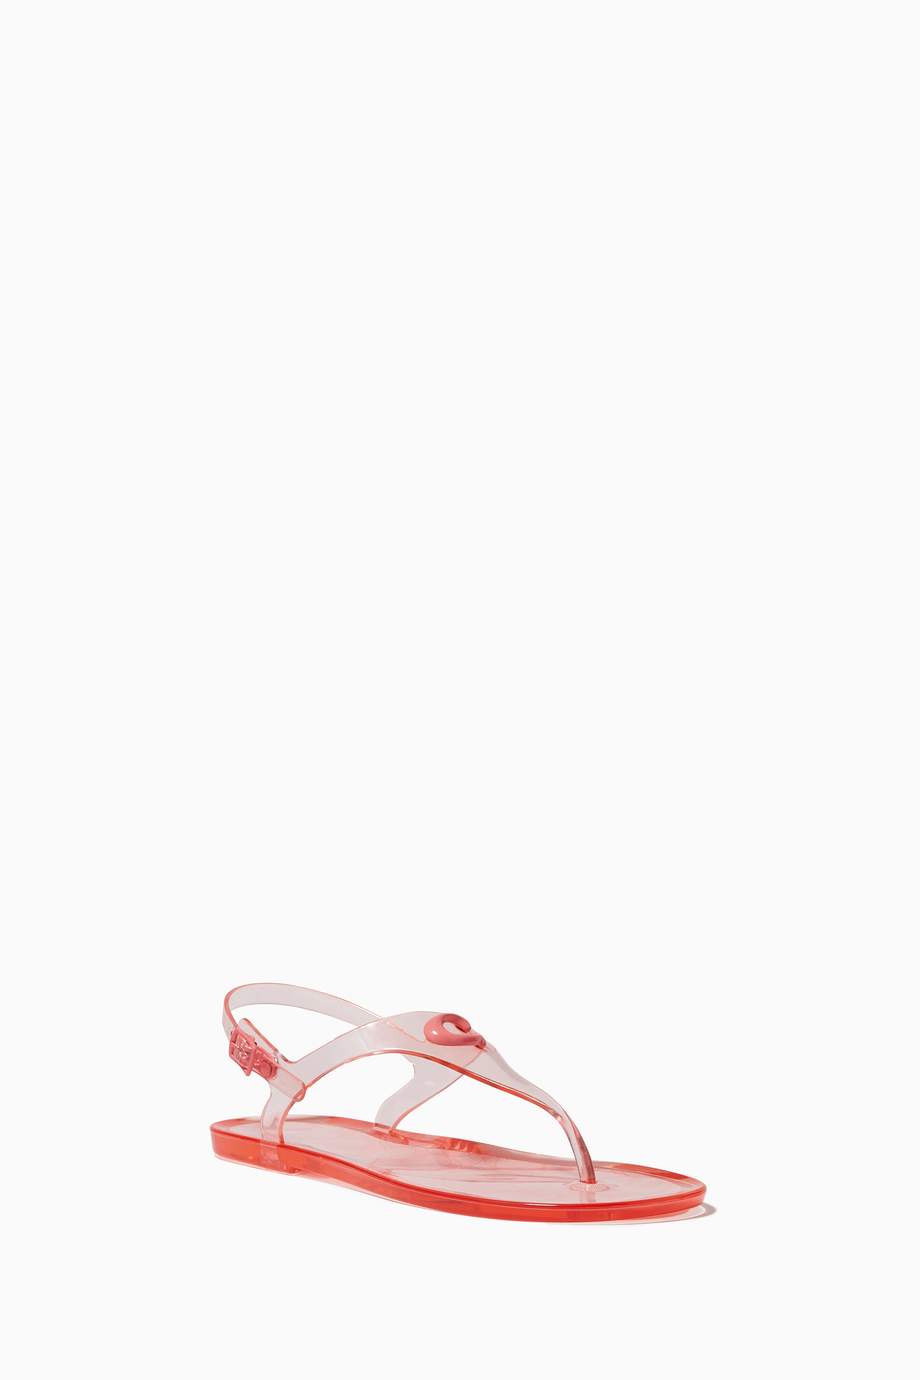 Shop Coach Pink Natalee Jelly Thong Sandals in Transparent Rubber for Women | Ounass Saudi